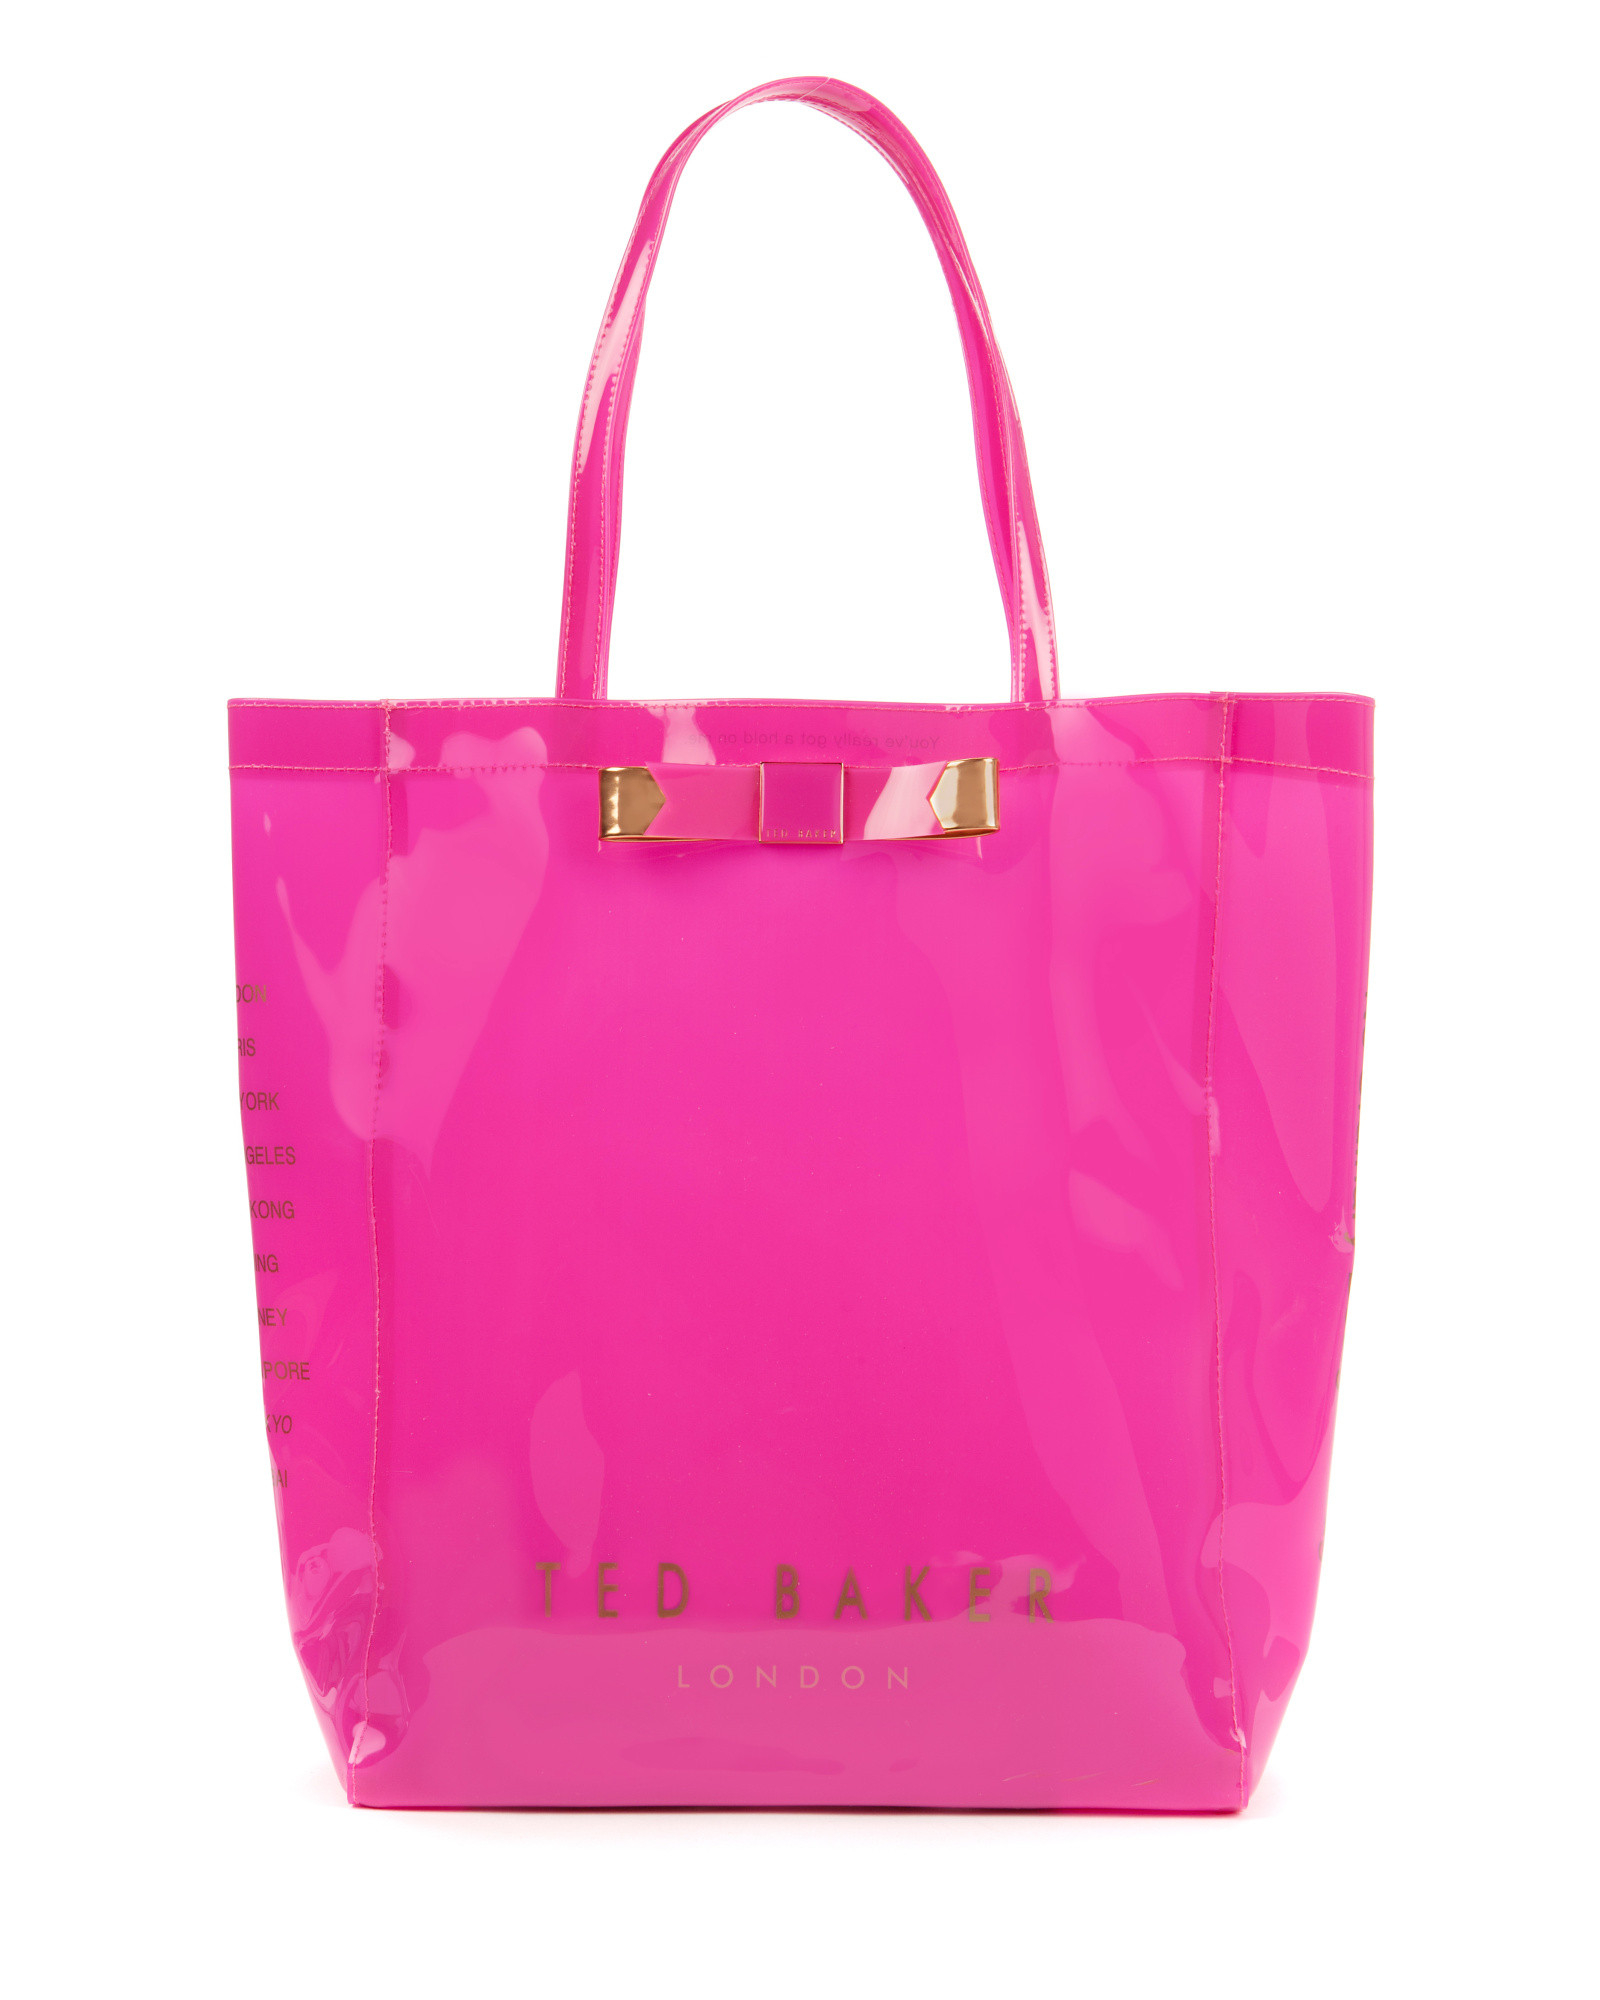 Ted Baker Bow Shopper Bag in Pink (Bright Pink) | Lyst